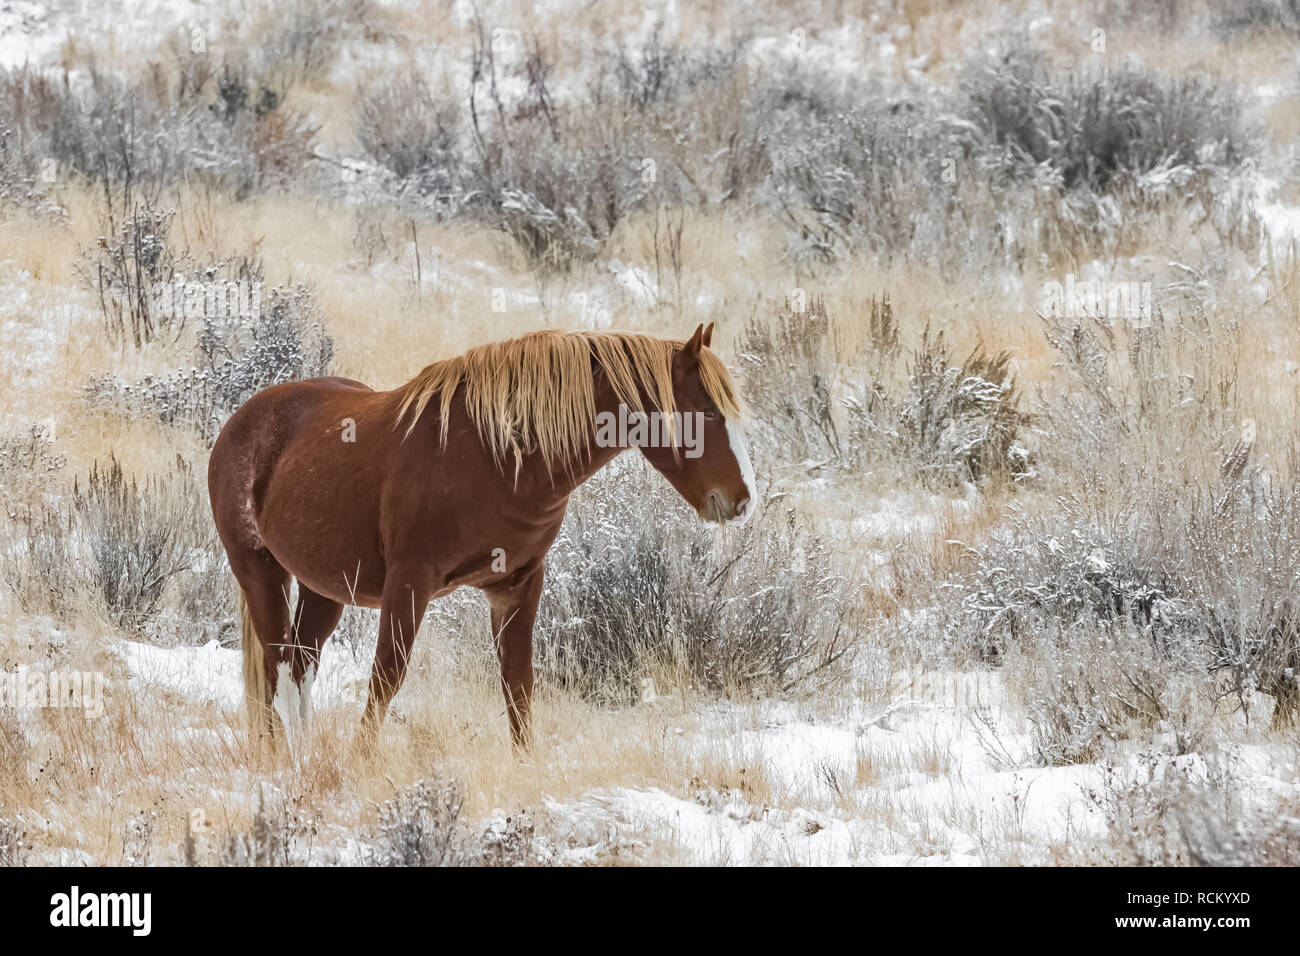 Wild Horse, Equus caballus, grazing in a snowy November grassland in the South Unit of Theodore Roosevelt National Park, North Dakota, USA Stock Photo